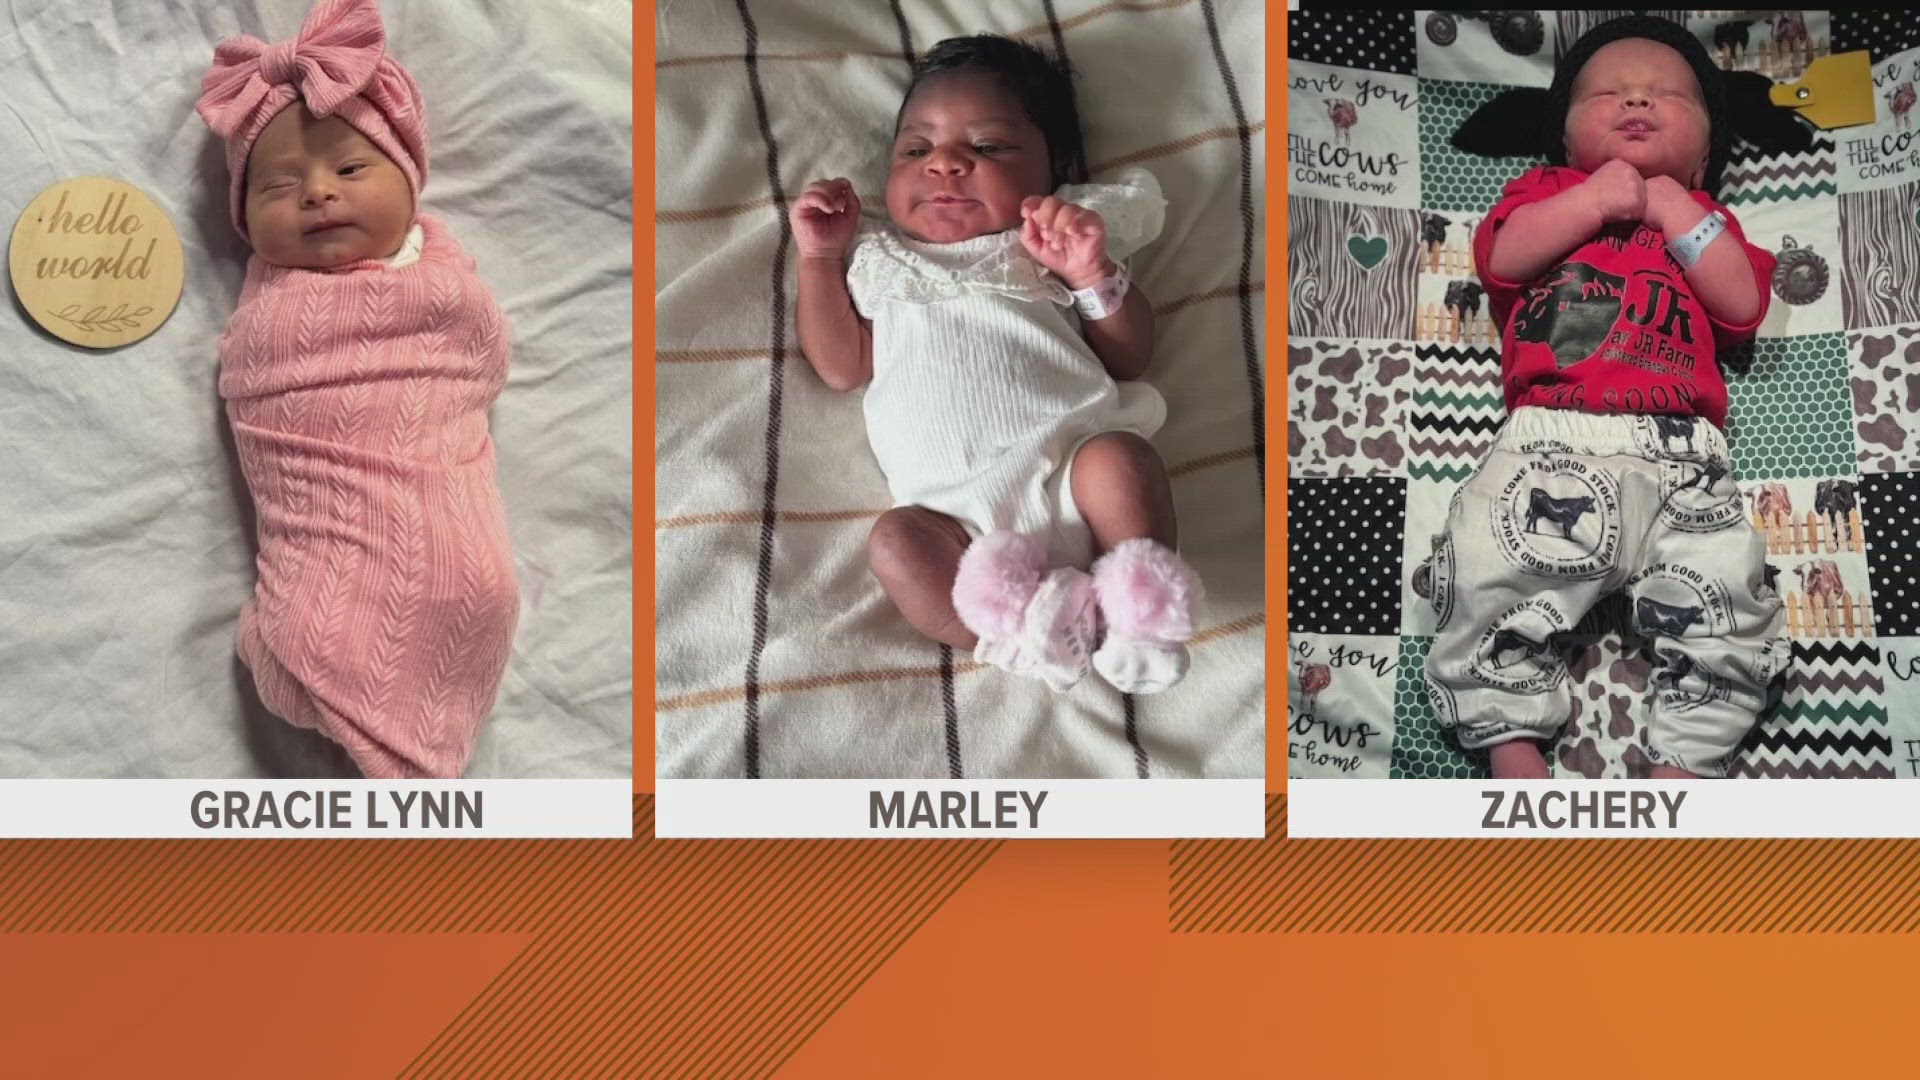 Three babies born at the hospital on Mother's Day are named Gracie Lynn, Marley and Zachery.